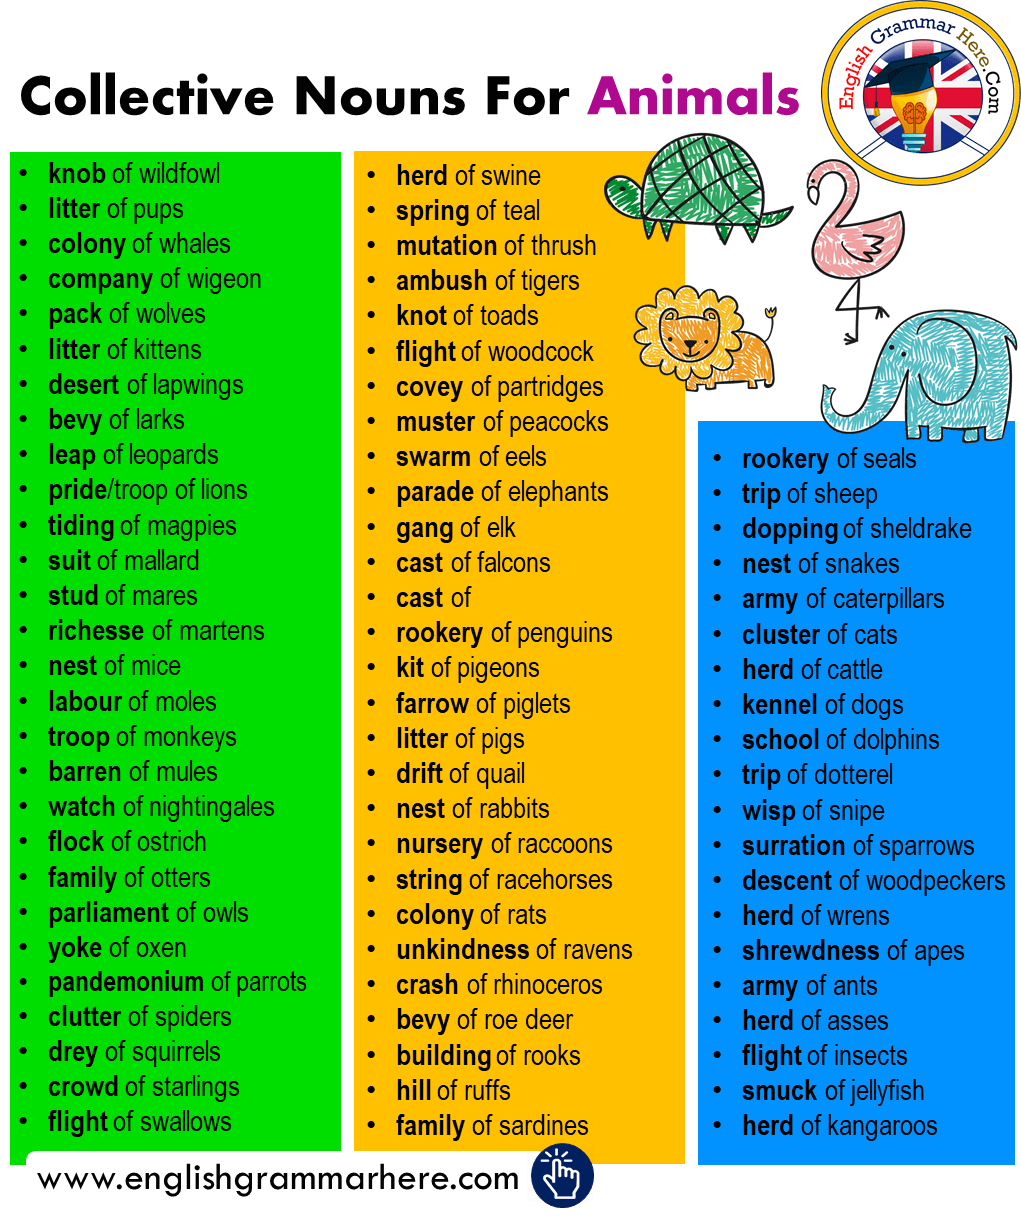 Collective Nouns For Animals in English - English Grammar Here